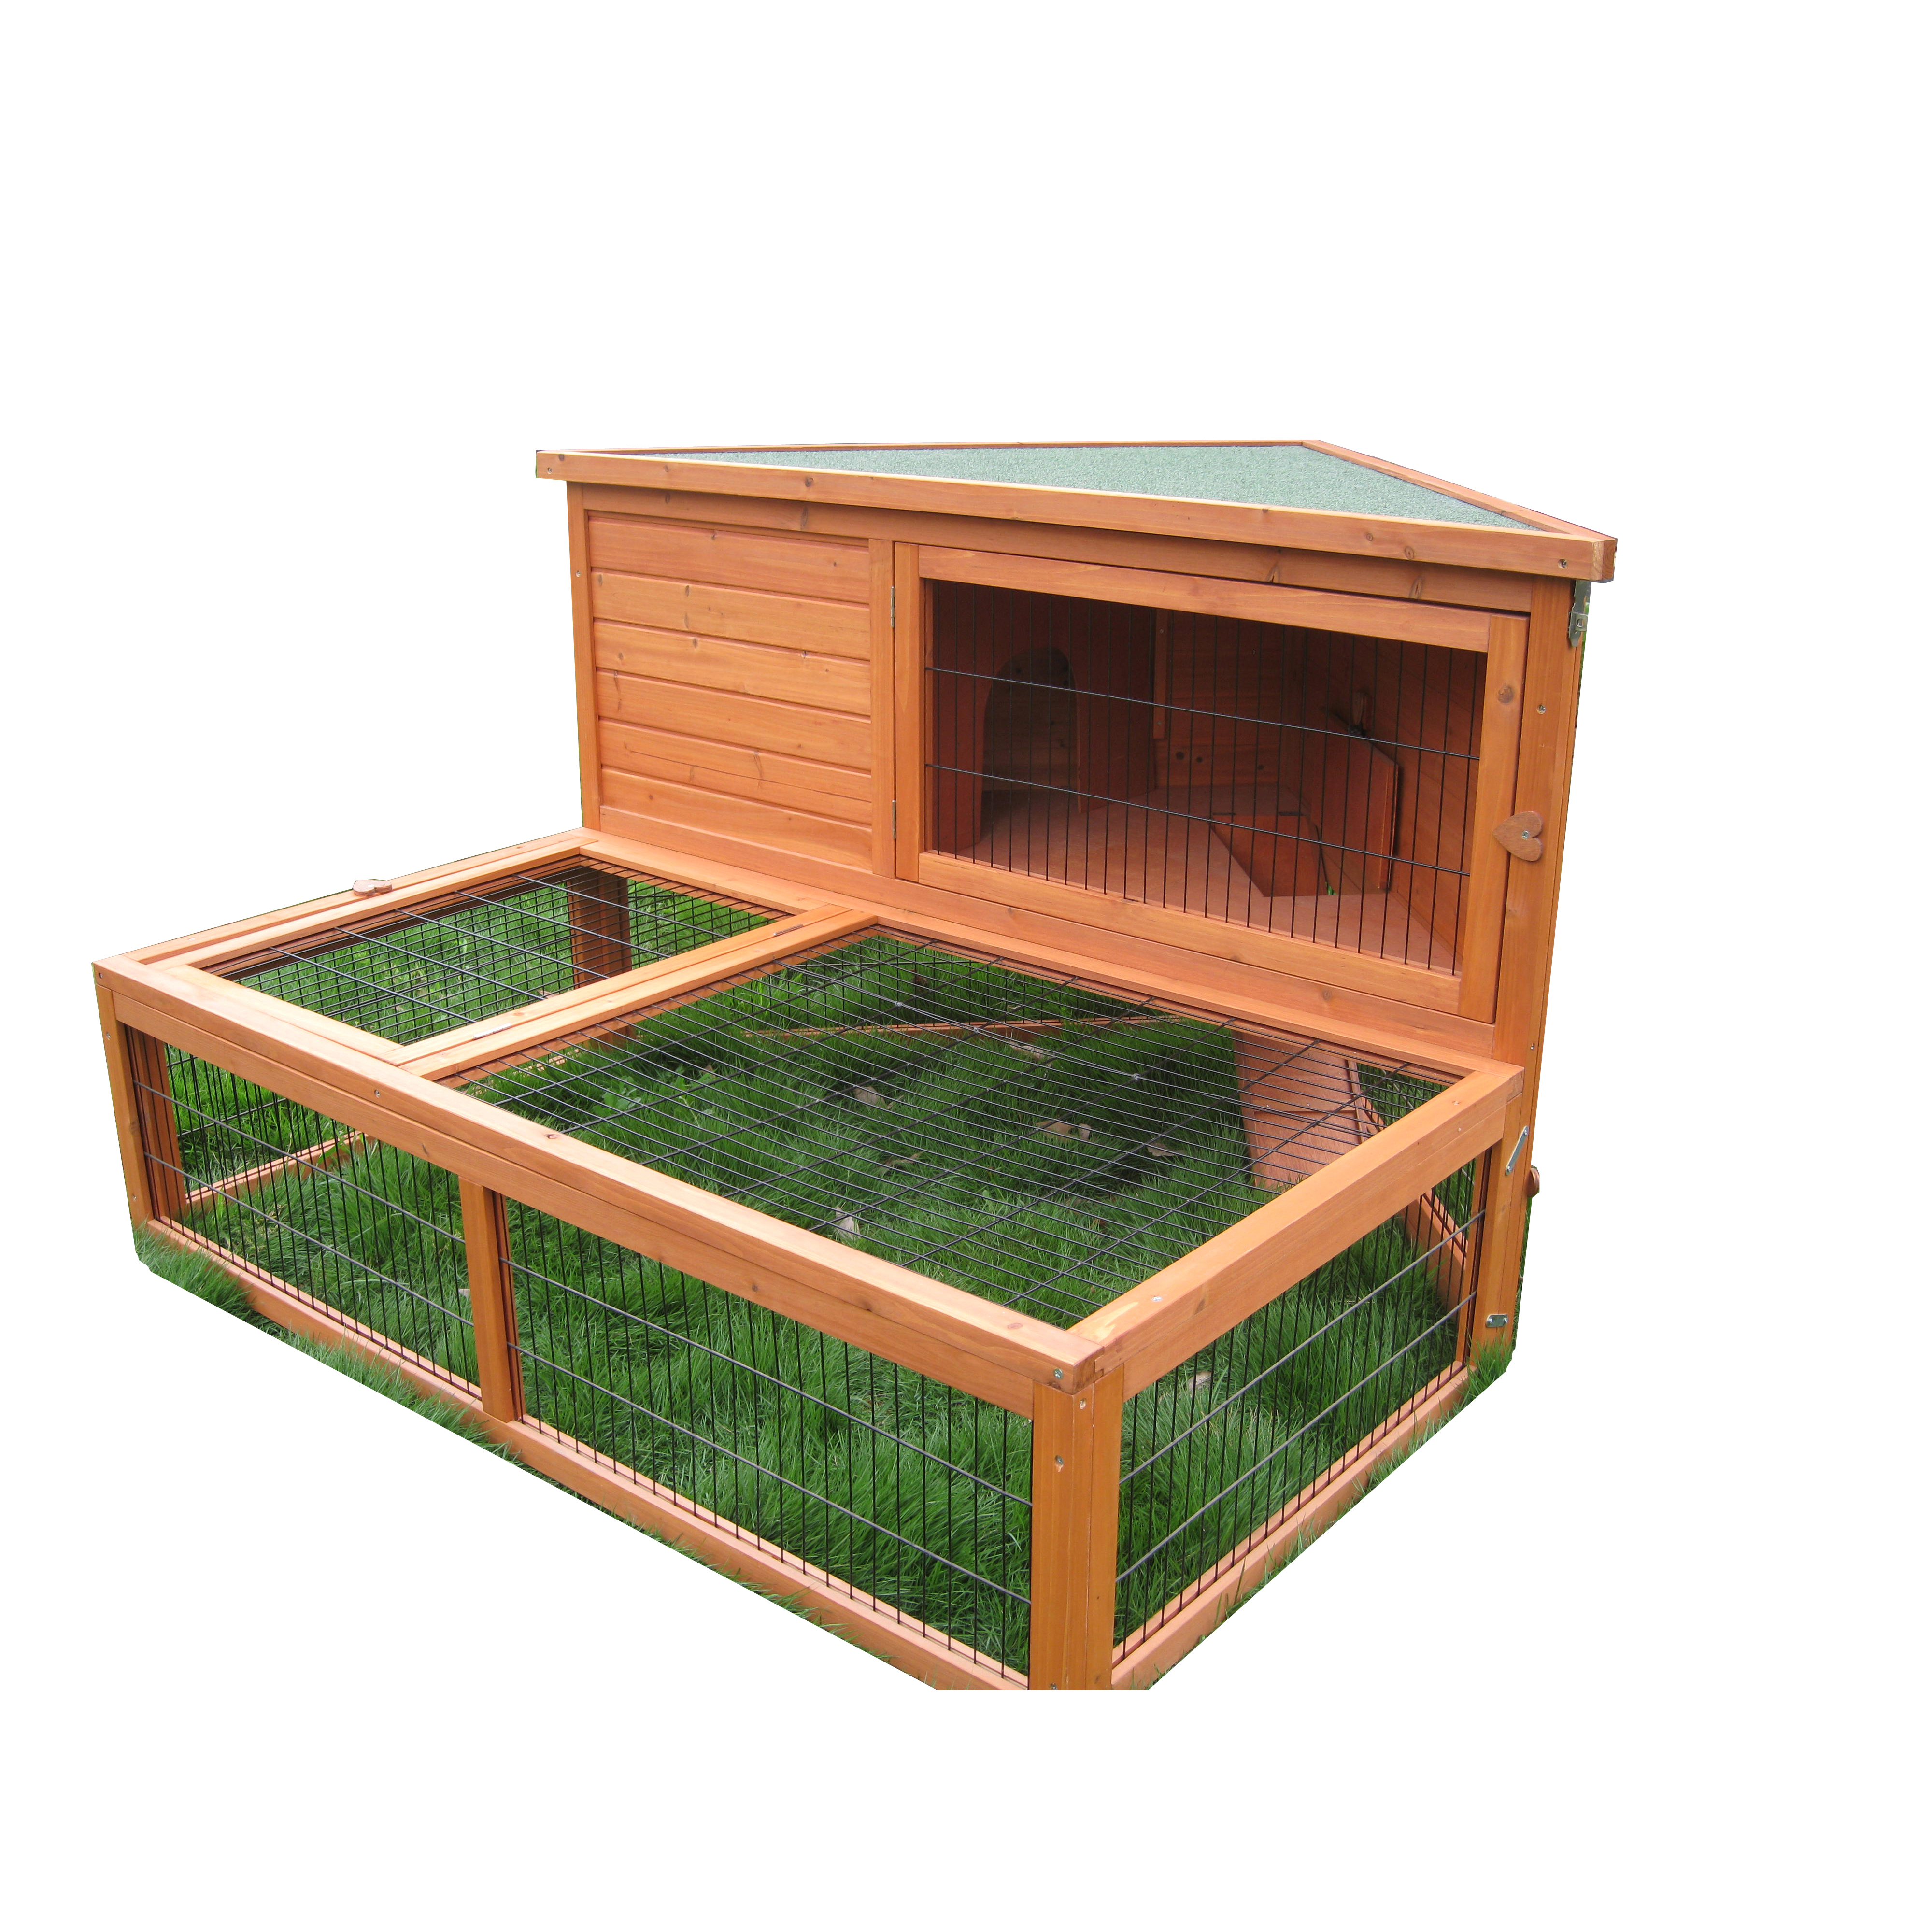 Super Purchasing for Portable Dog Crate -
 custom personalized pretty easy portable indoor rabbit hutch designs – Easy